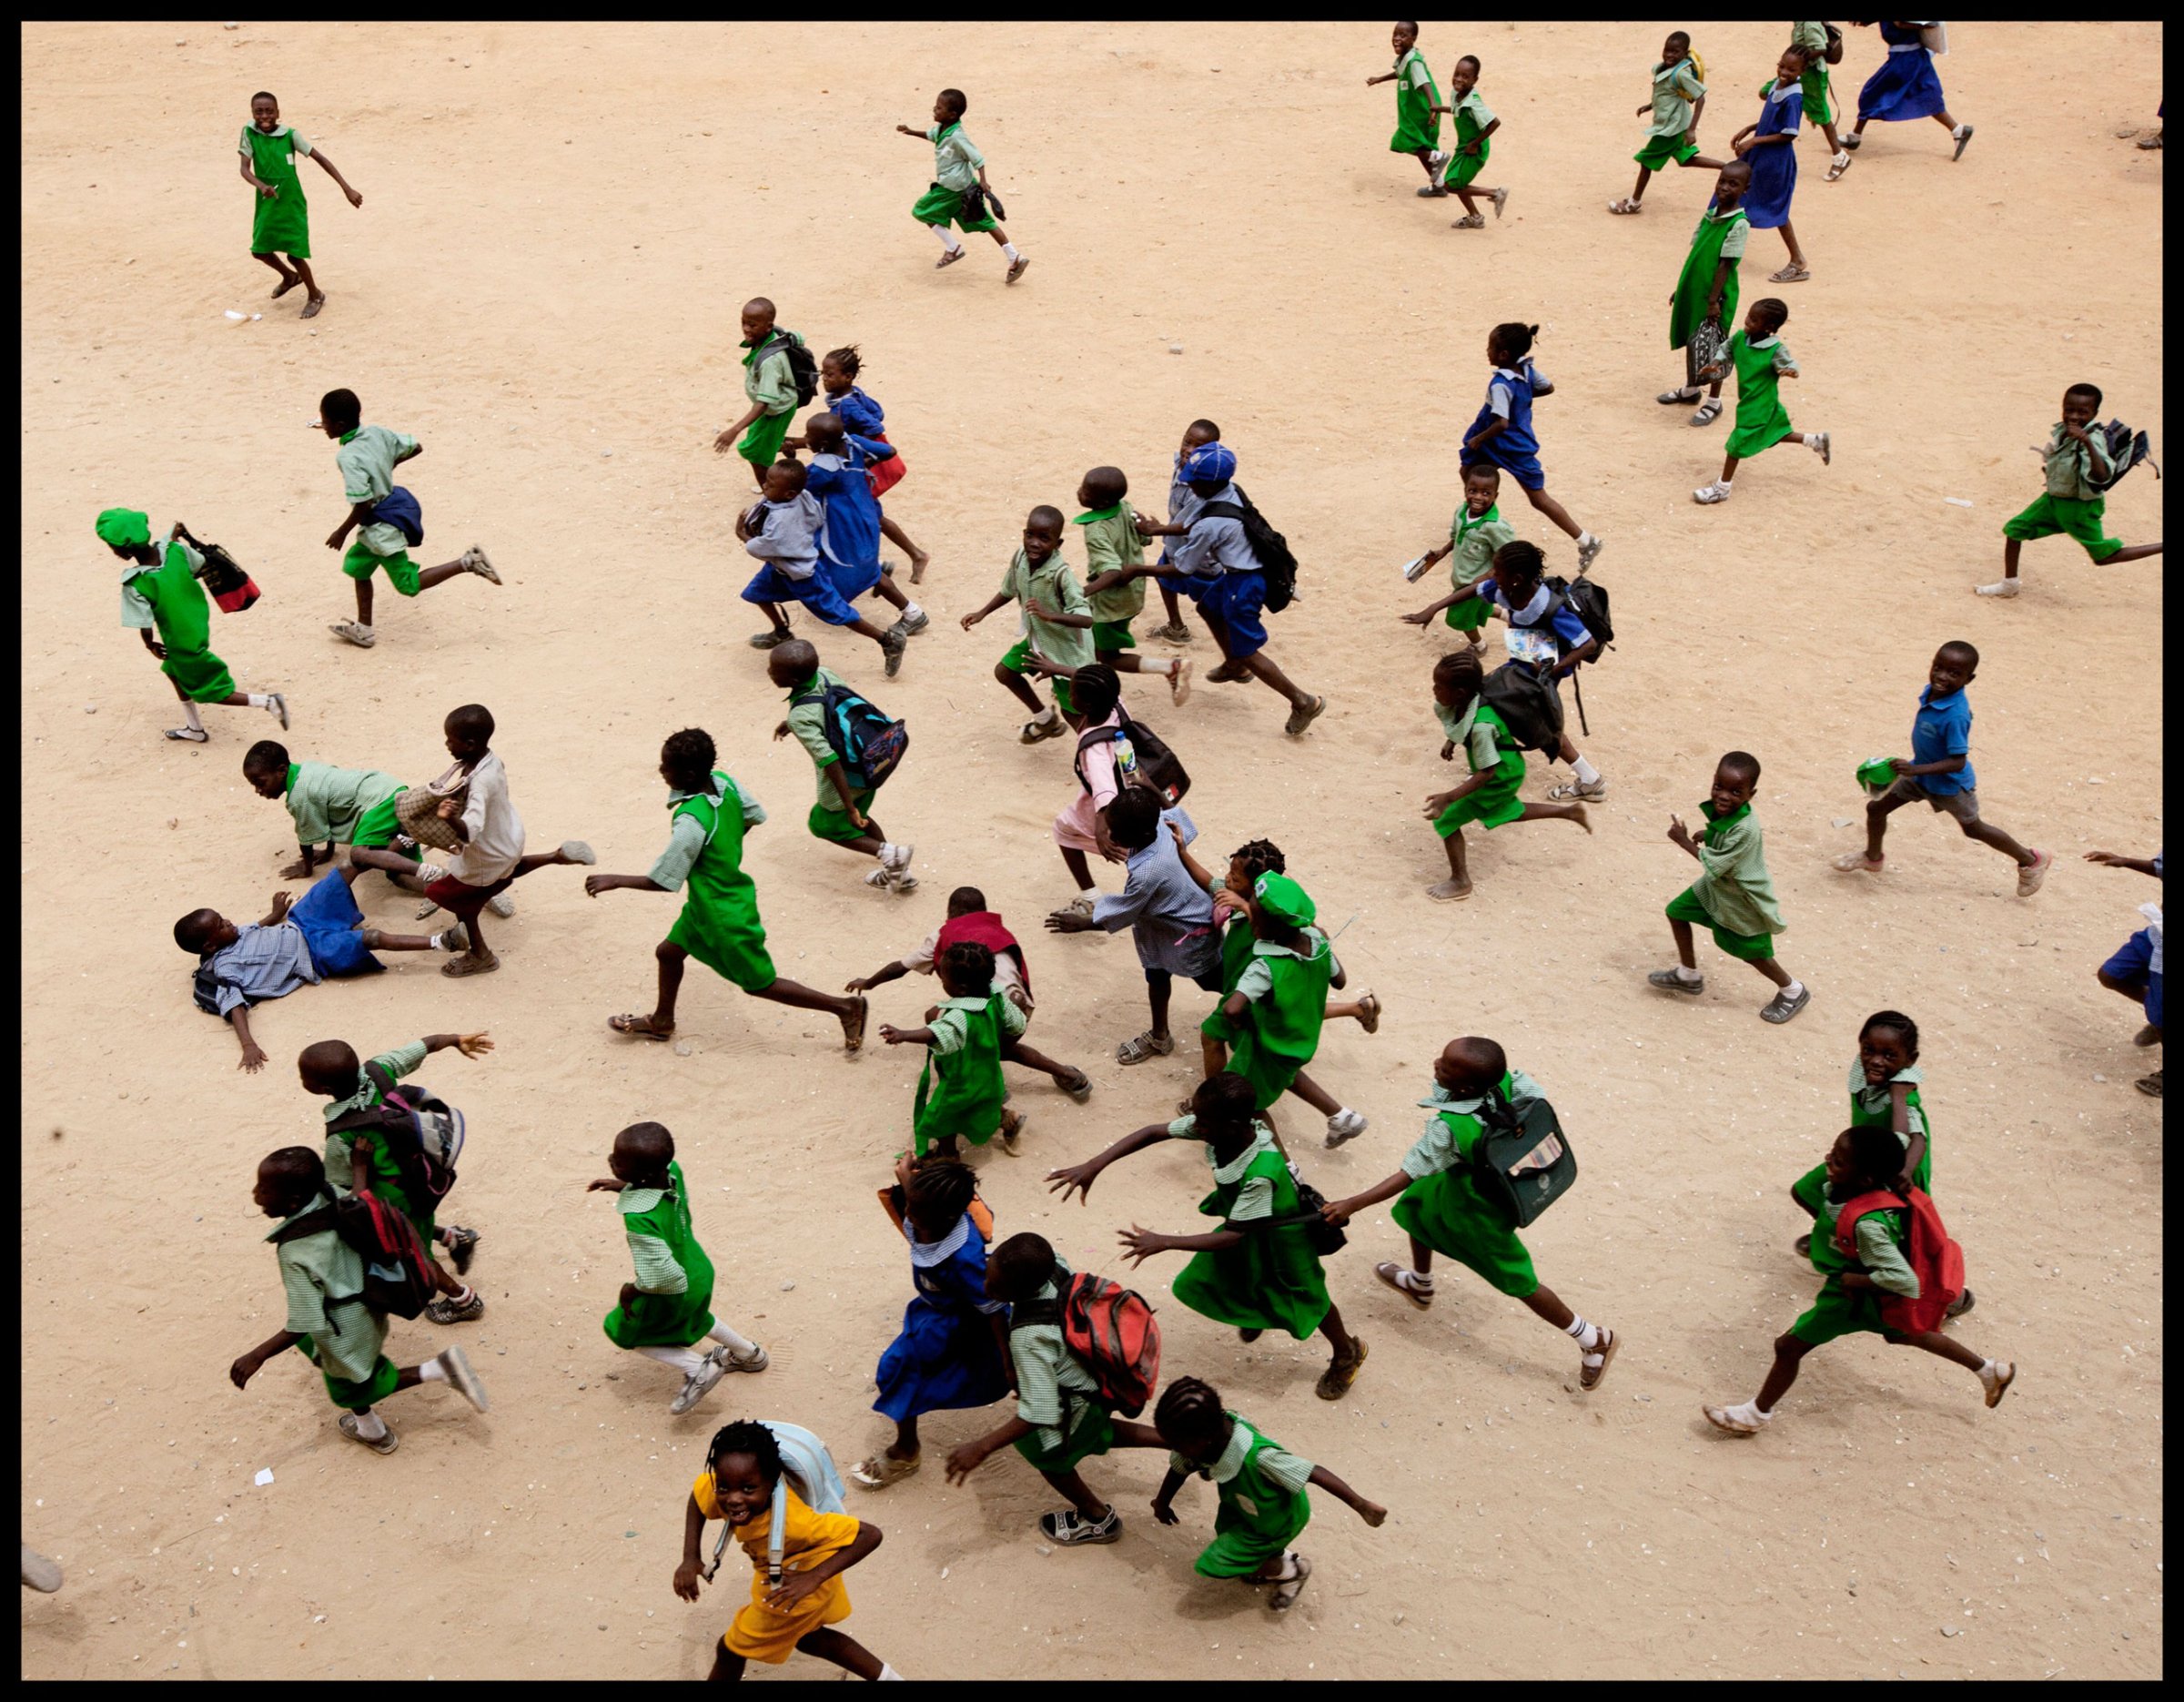 Children run at a school in Lagos. More African kids are finishing primary school, but that’s just the beginning